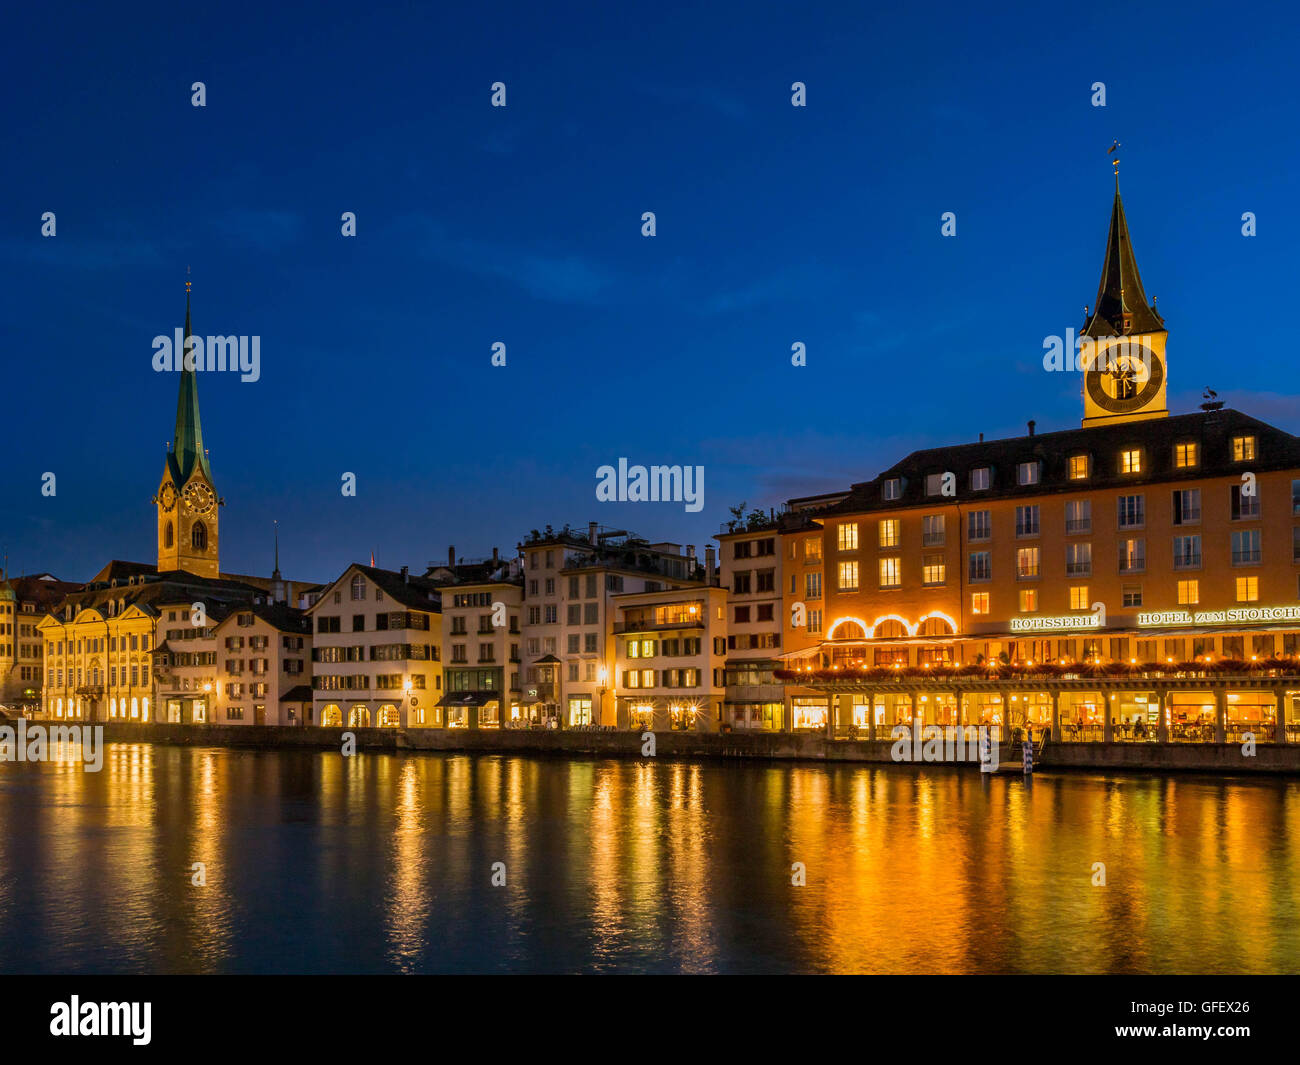 Frauenmunster Abbey and St. Peters Church in Zurich at night,  Switzerland, Europe Stock Photo